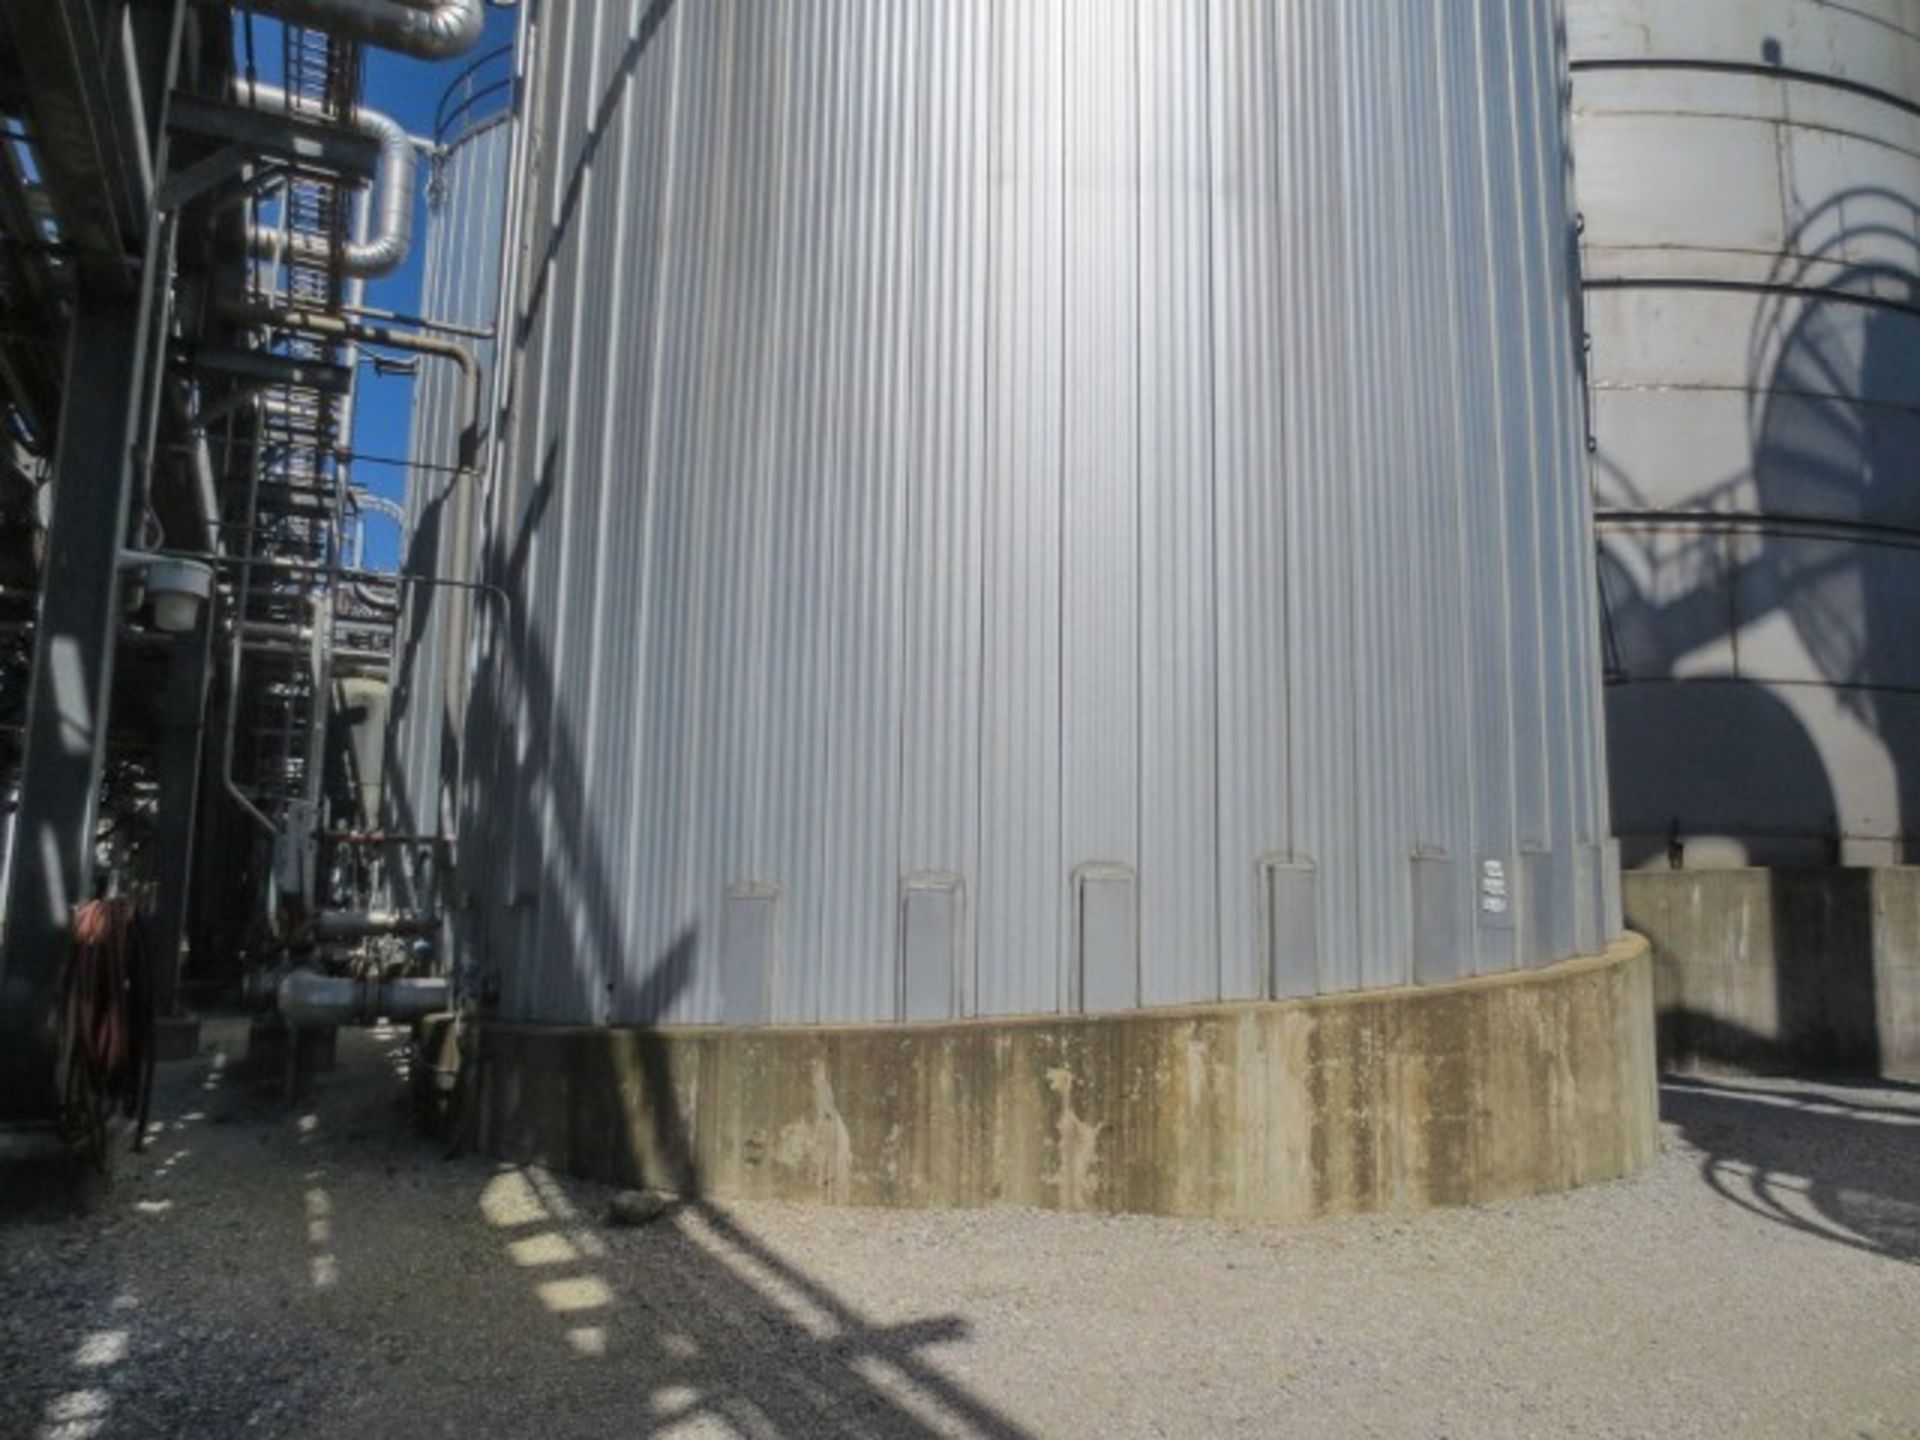 Vertical tank stainless steel 304 AP 650I rated. MAWP at 0.25 psig at 300F. Size is 28'-6" dia x 38' - Image 5 of 6